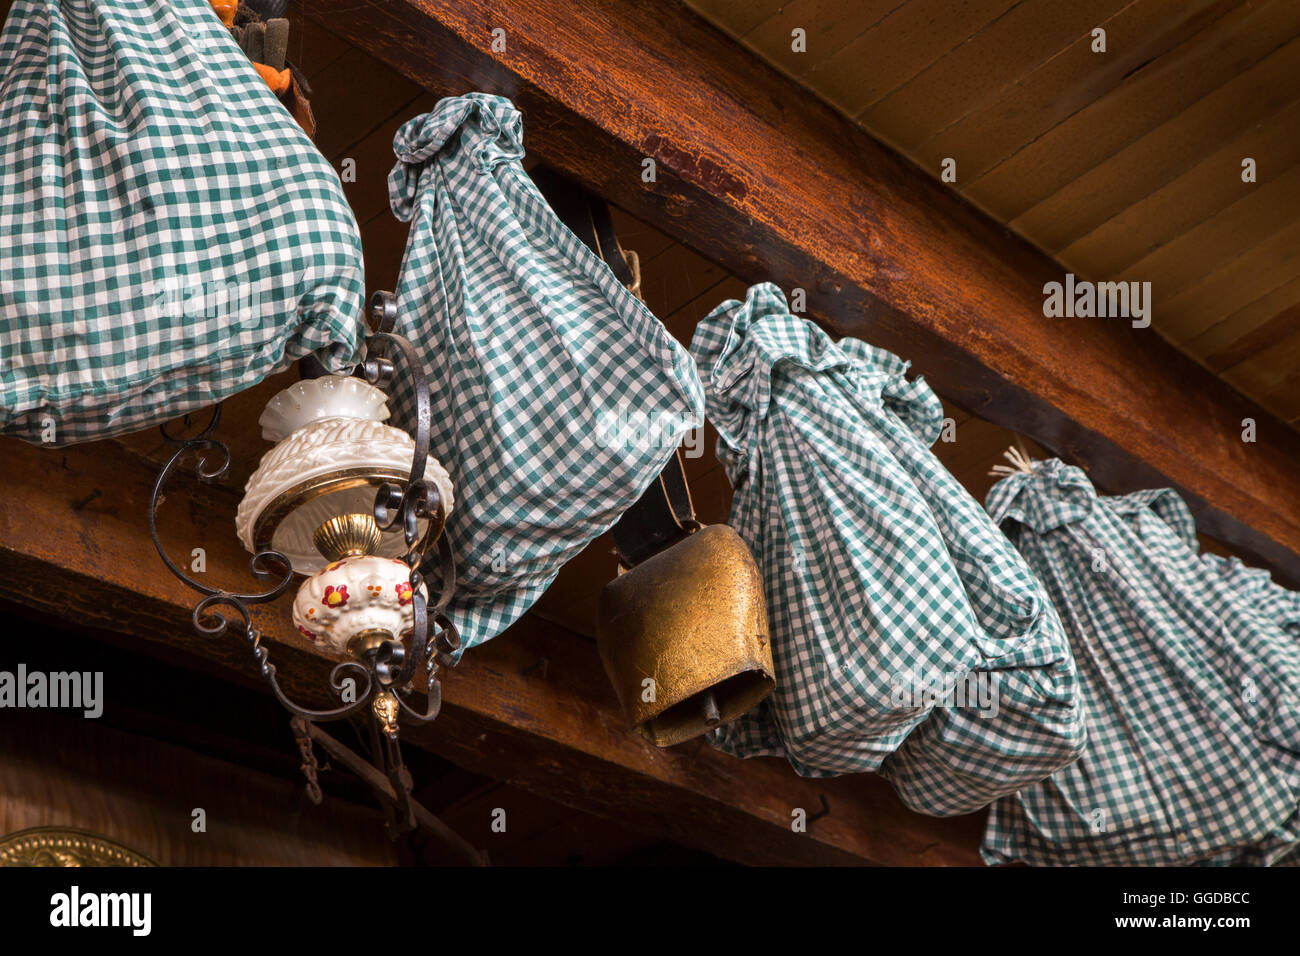 Hams wrapped in cloth for further aging and stored by hanging from the ceiling in farmhouse Stock Photo